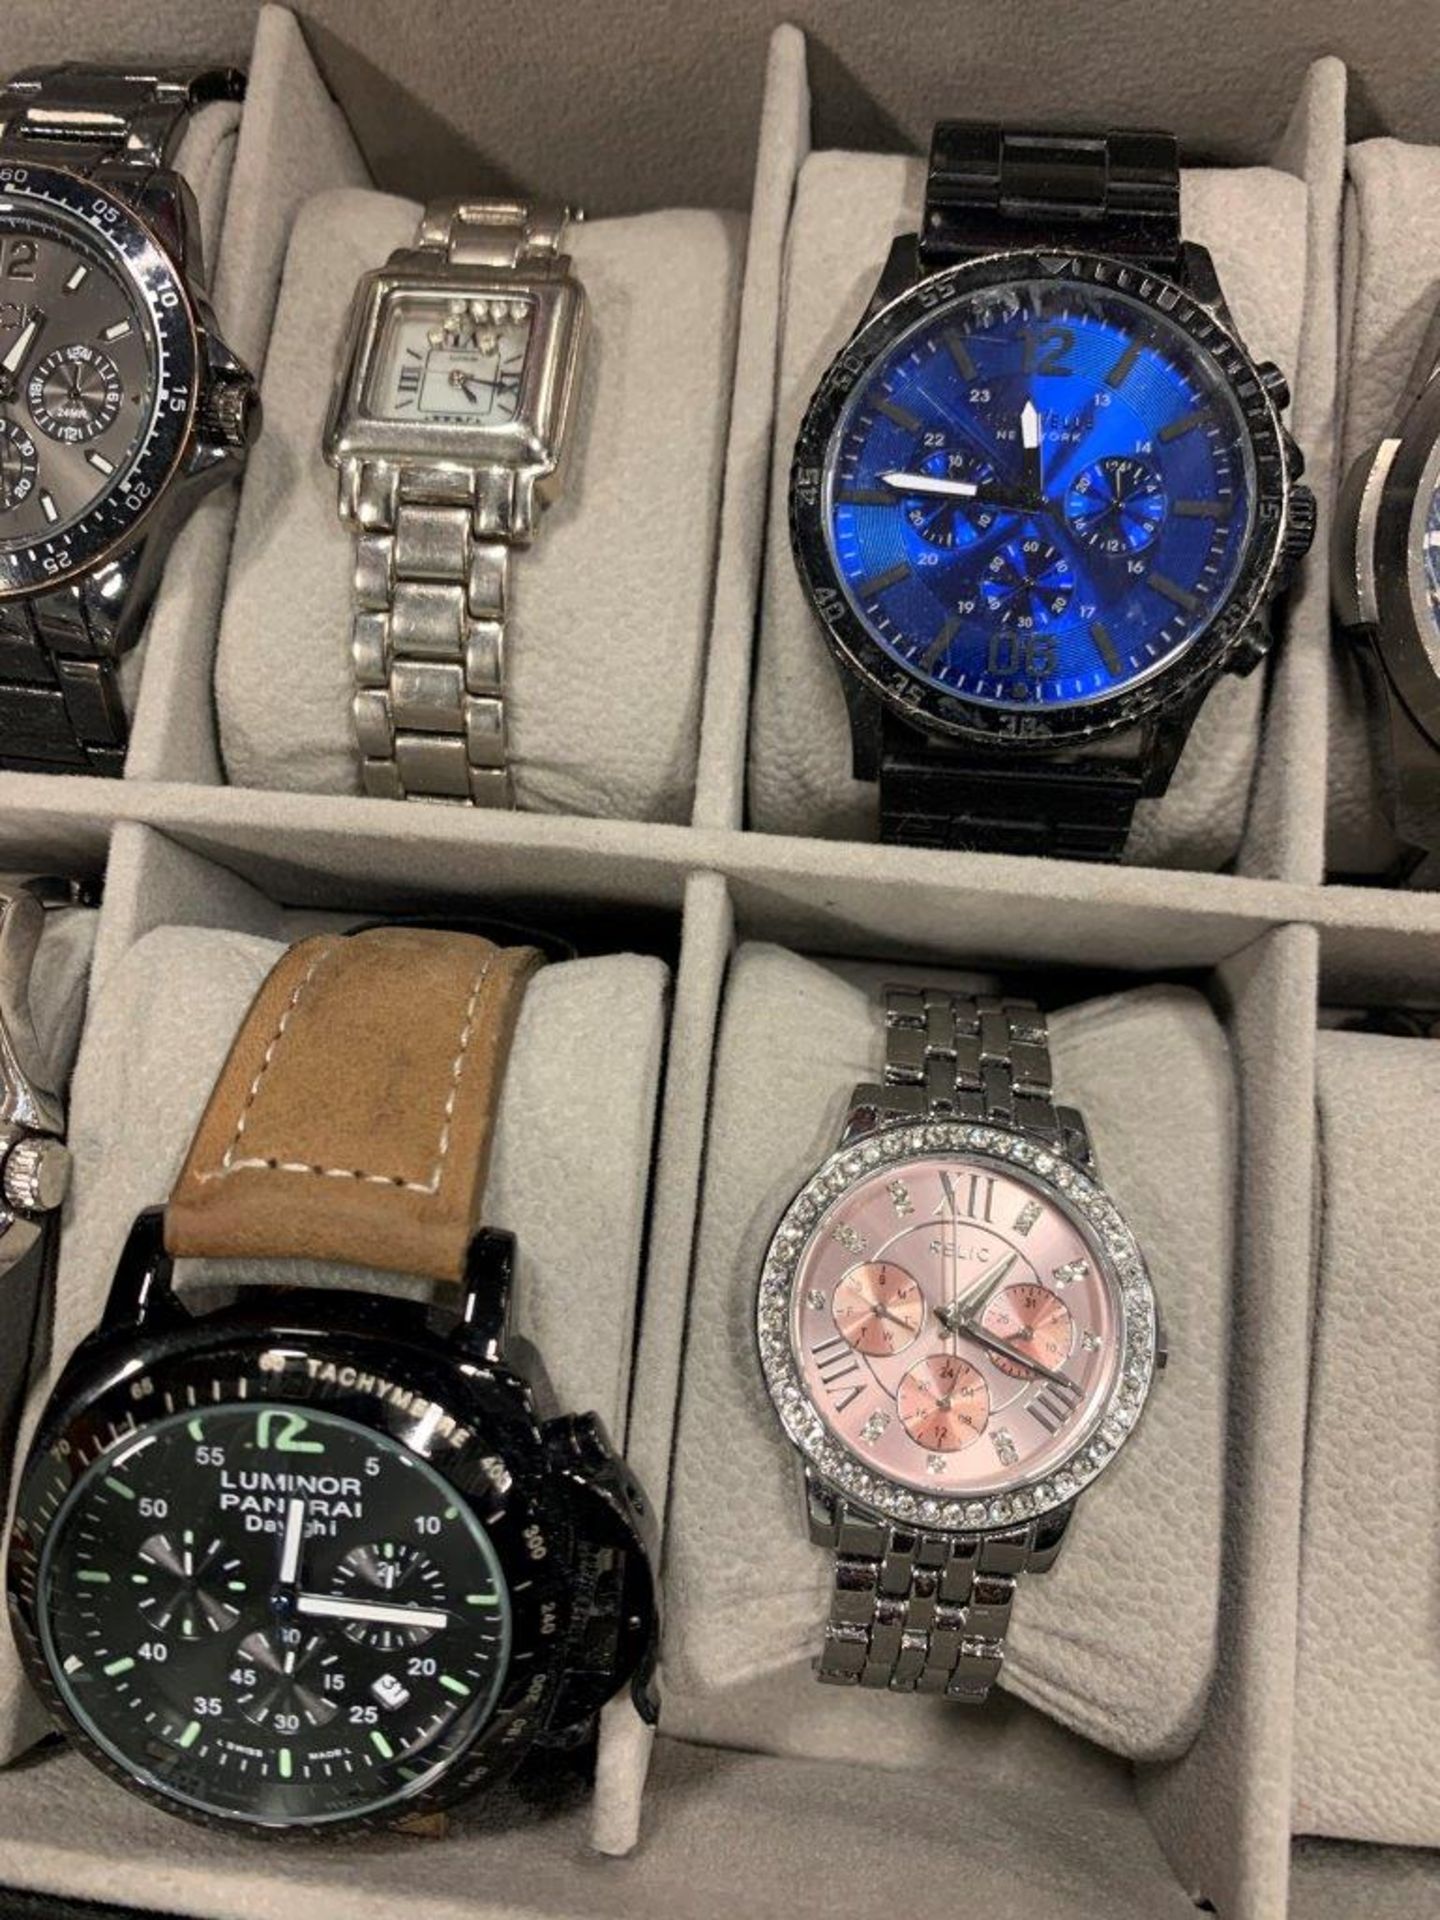 L/O ASSORTED WATCHES IN DISPLAY CASE - A31 - Image 6 of 9